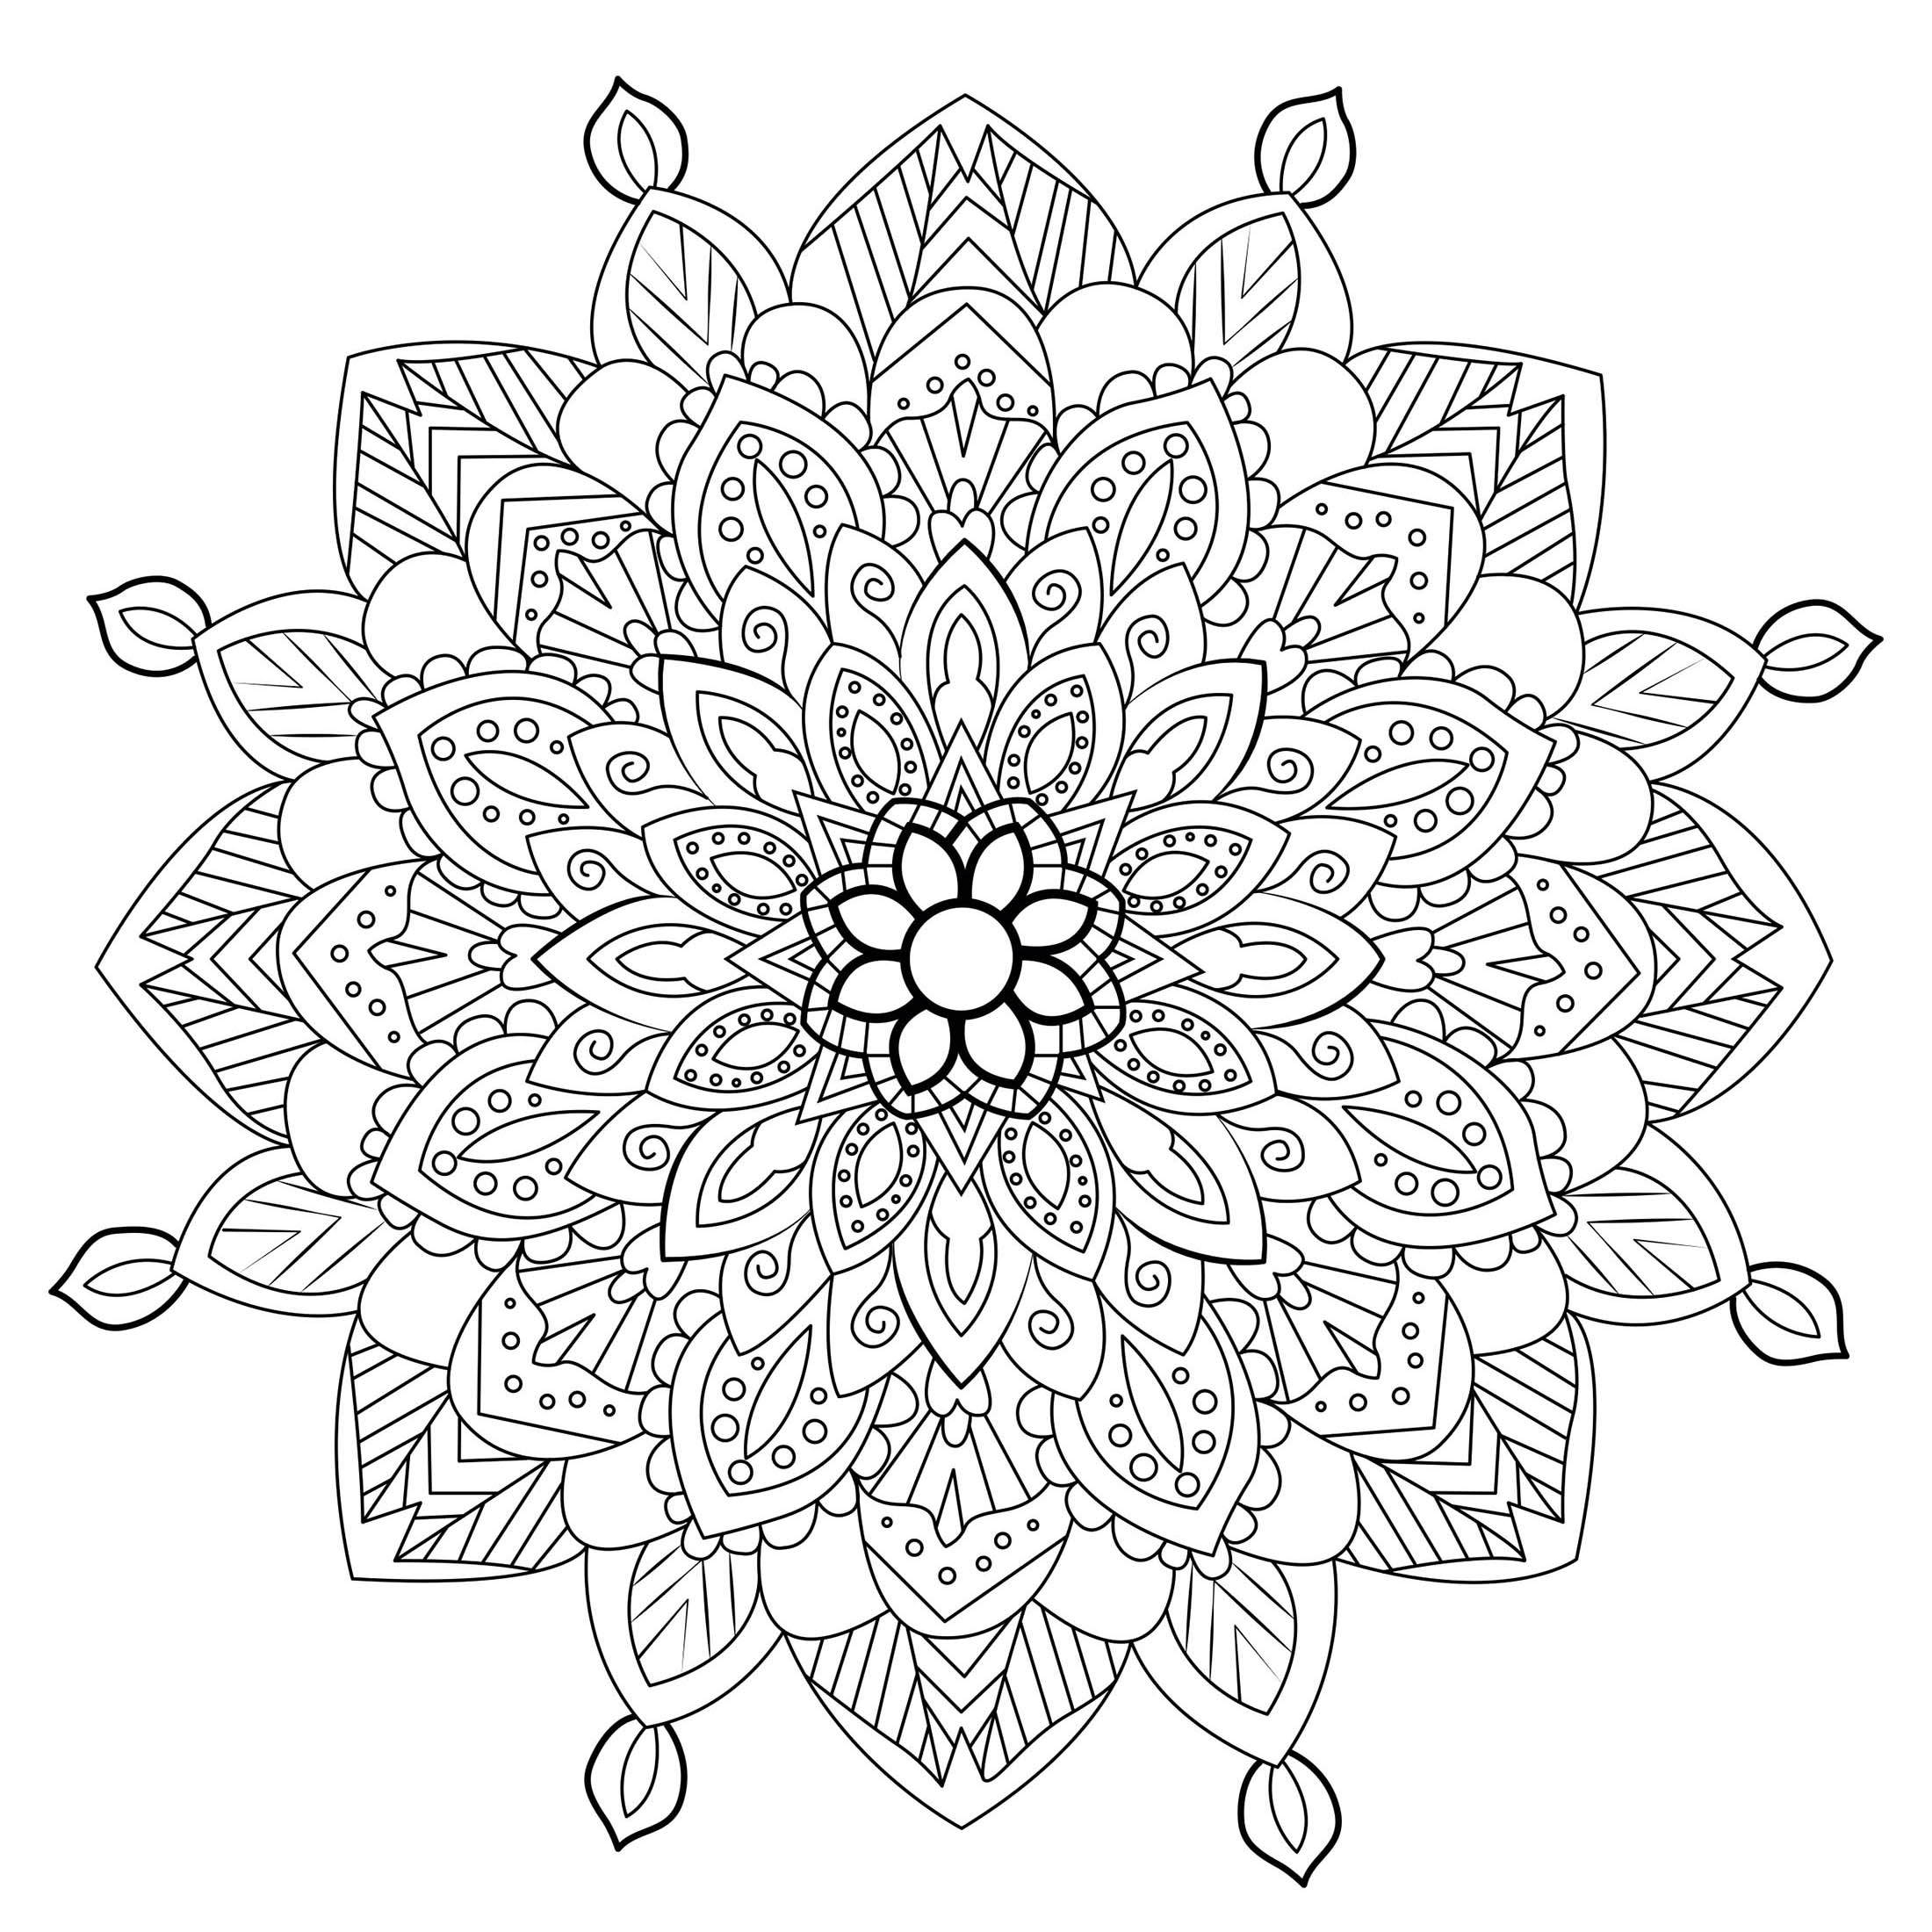 Many small details and little areas for a Mandala very original and harmonious. Do whatever it takes to get rid of any distractions that may interfere with your coloring.